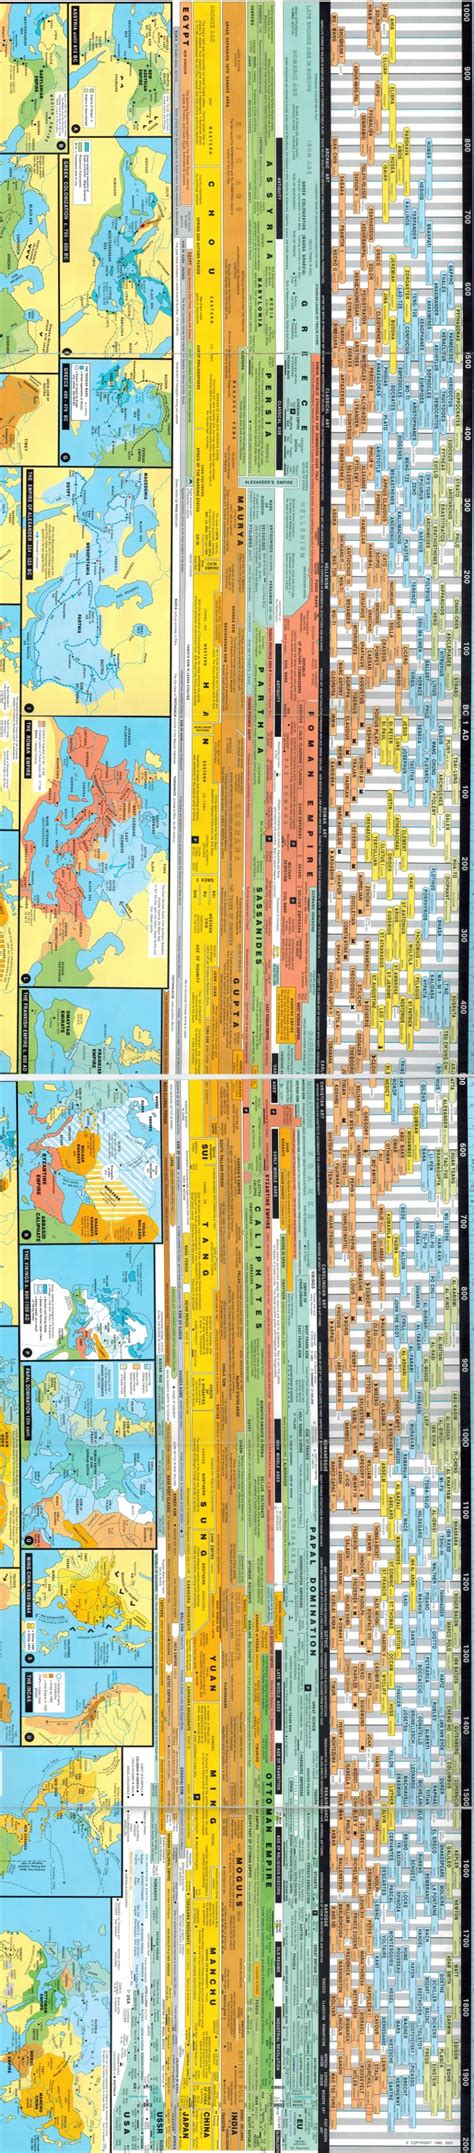 64 Best Charts History Timelines Images On Pinterest